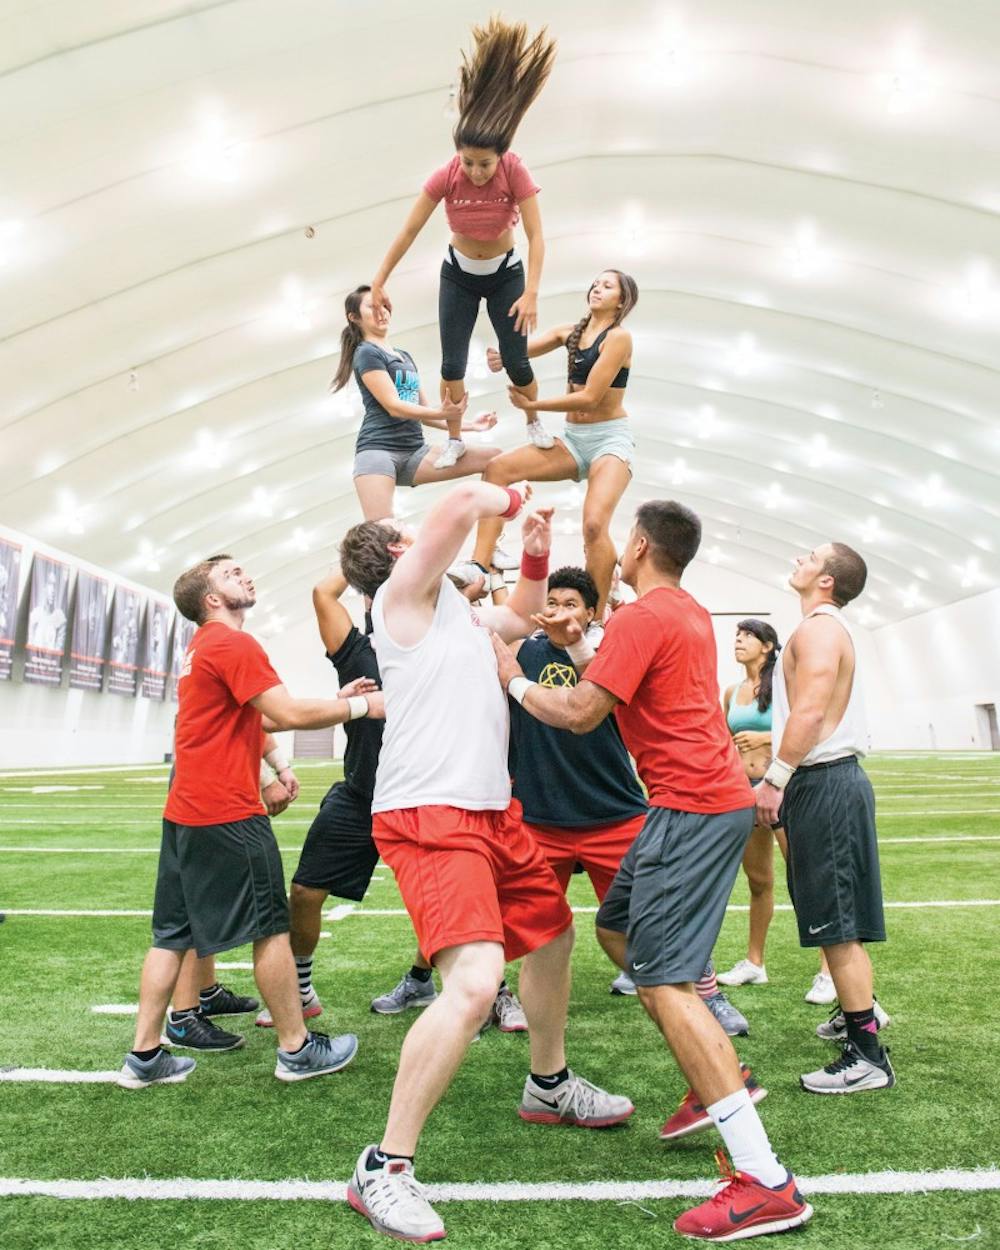 The Large Co-Ed Cheerleading Team practices rewinds at the Football Indoor Practice Facility during an early morning practice. Two of the men, bottom-center, throw the top girl in a backward spin to the middle women, center, for the catch while the bases brace under the weight and spotters ensure the safety of all involved.